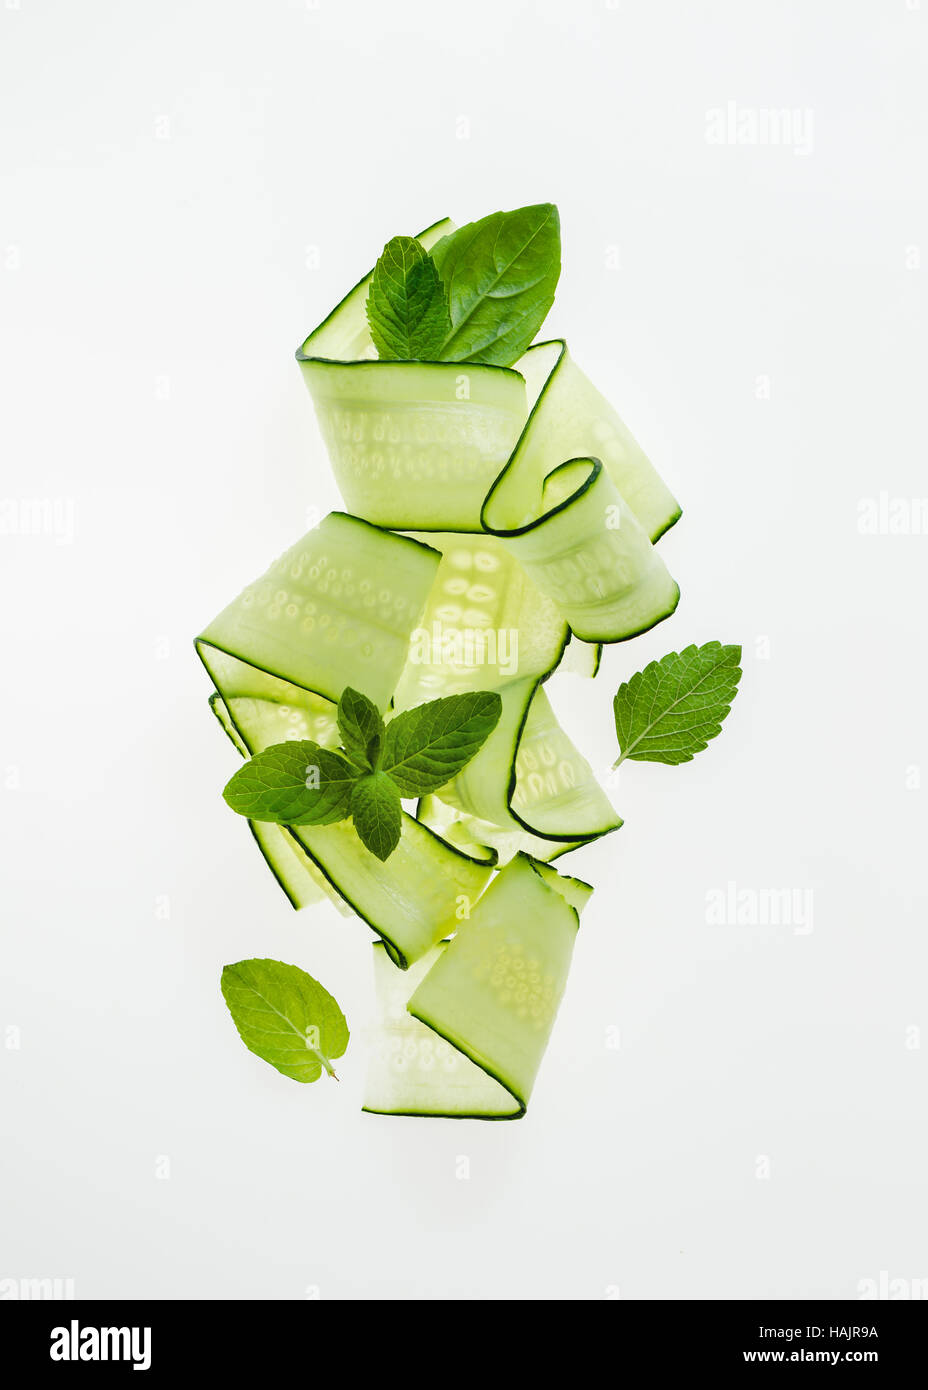 Cucumber noodles with mint leaves Stock Photo